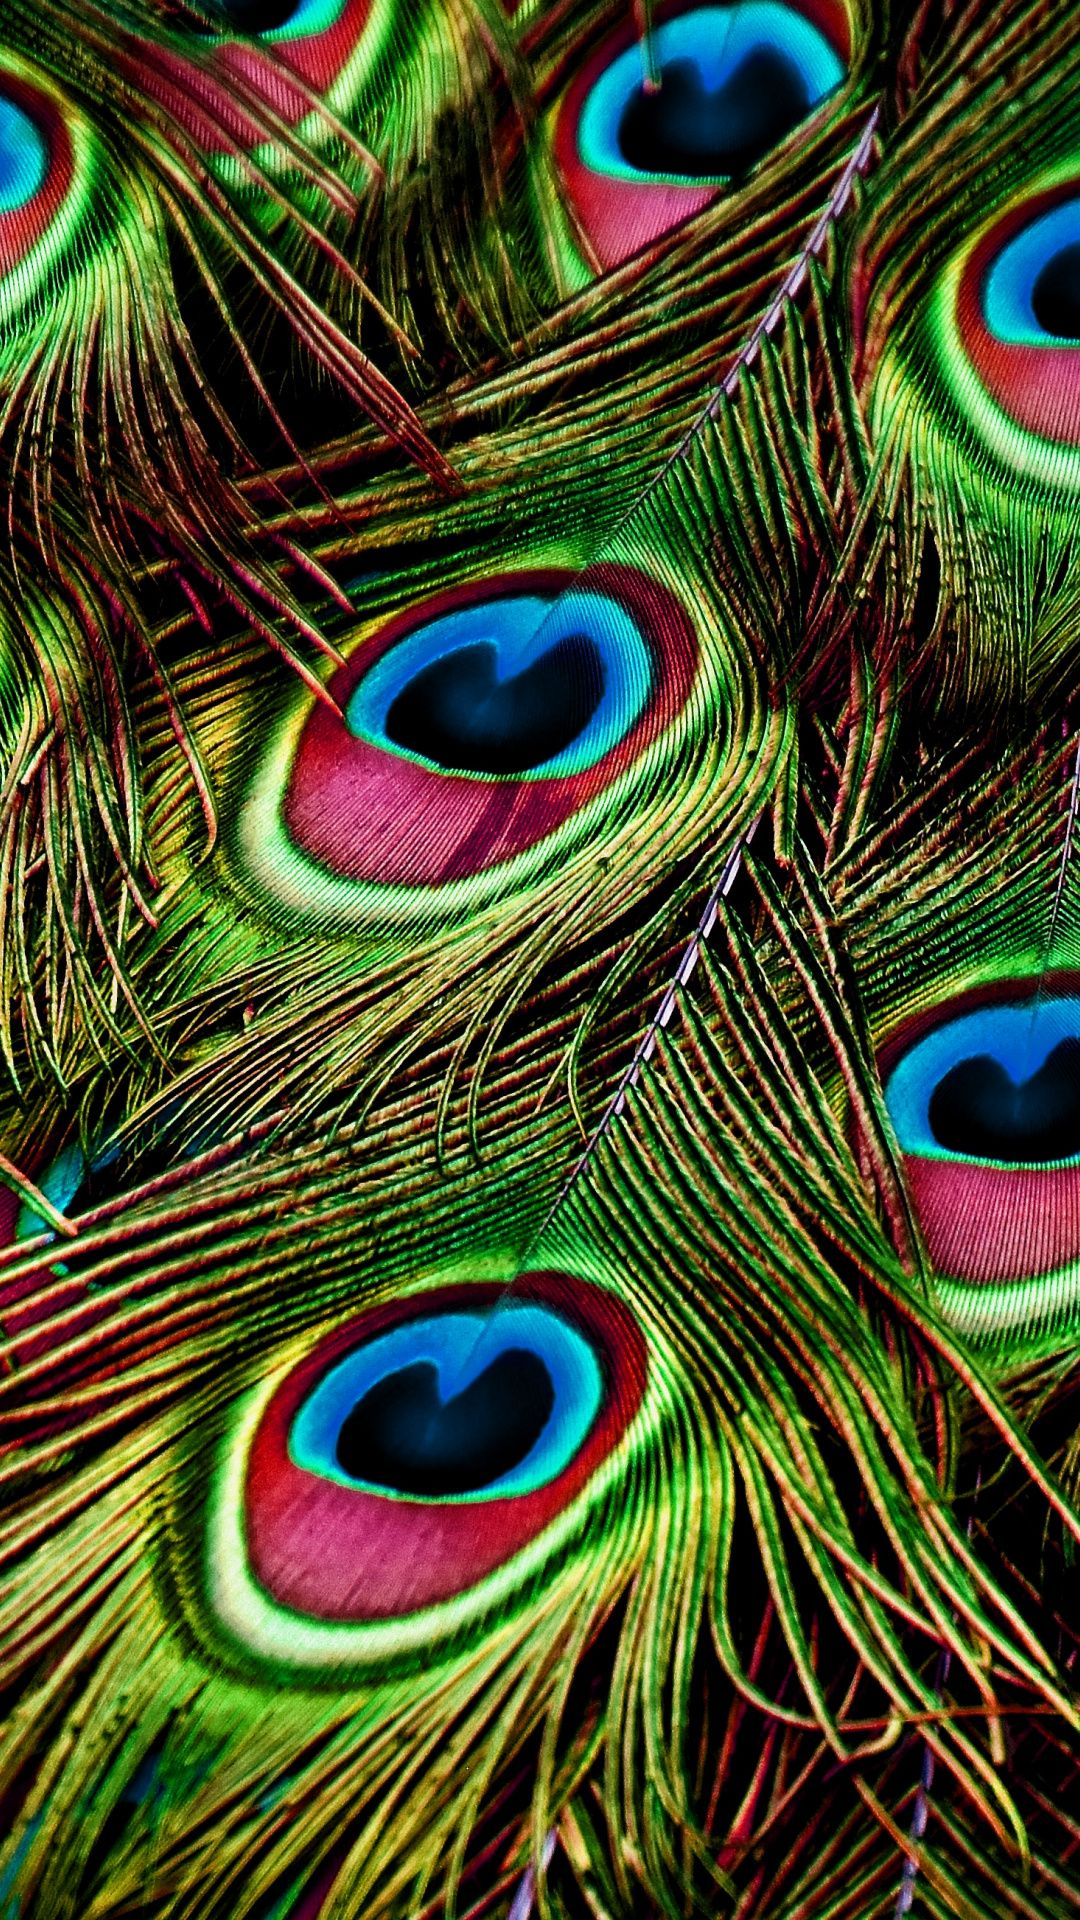 1080x1920 Peacock, feathers, close up, colorful wallpaper | Feather wallpaper, Peacock wallpaper, Feather wallpaper iphone